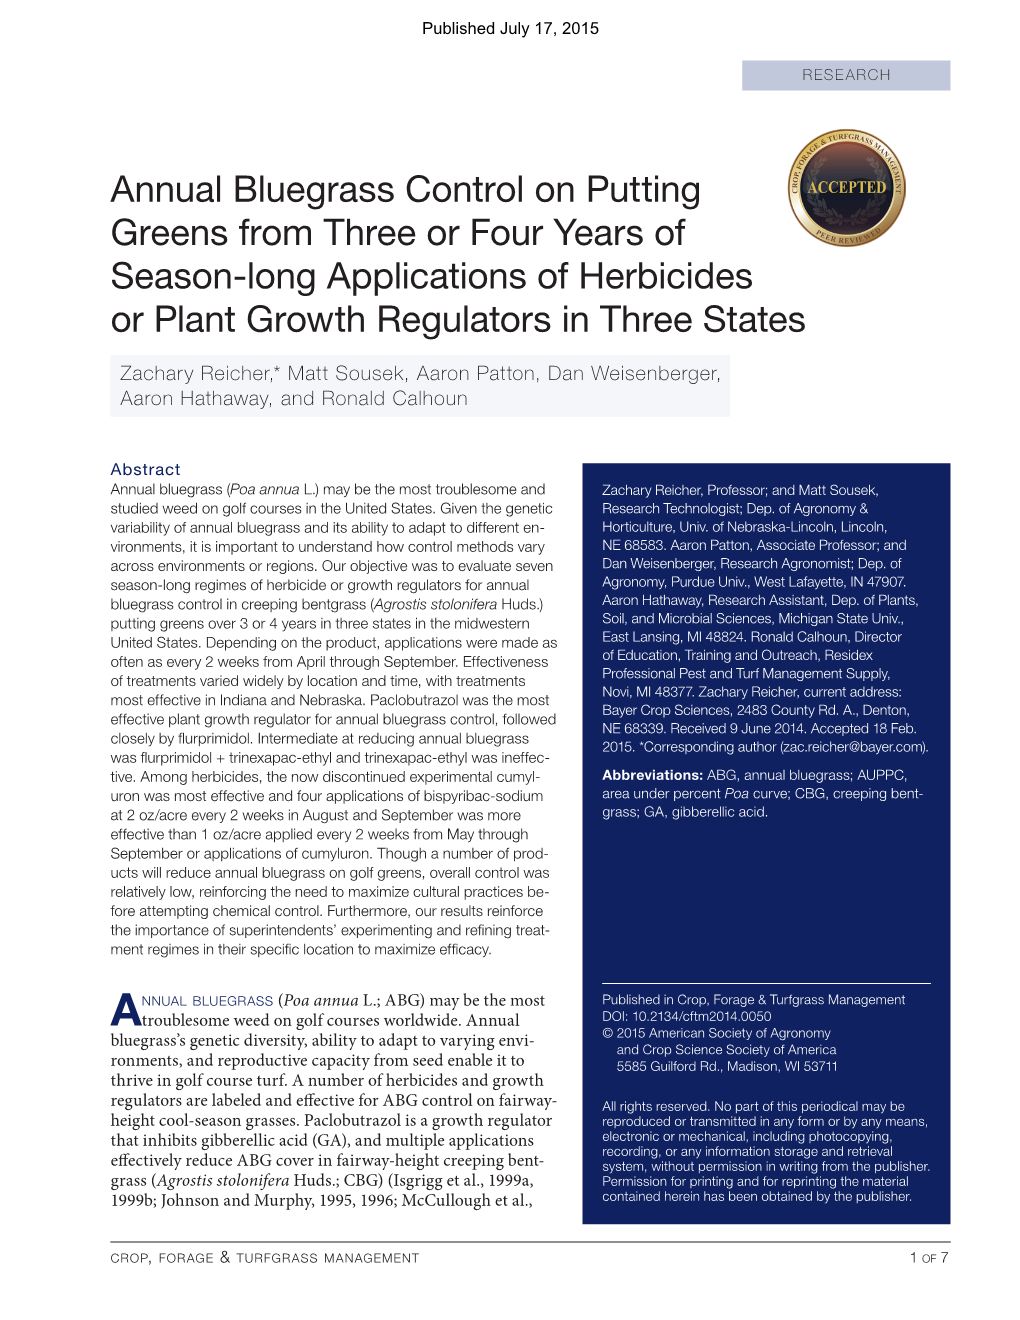 Annual Bluegrass Control on Putting Greens from Three Or Four Years of Season-Long Applications of Herbicides Or Plant Growth Regulators in Three States